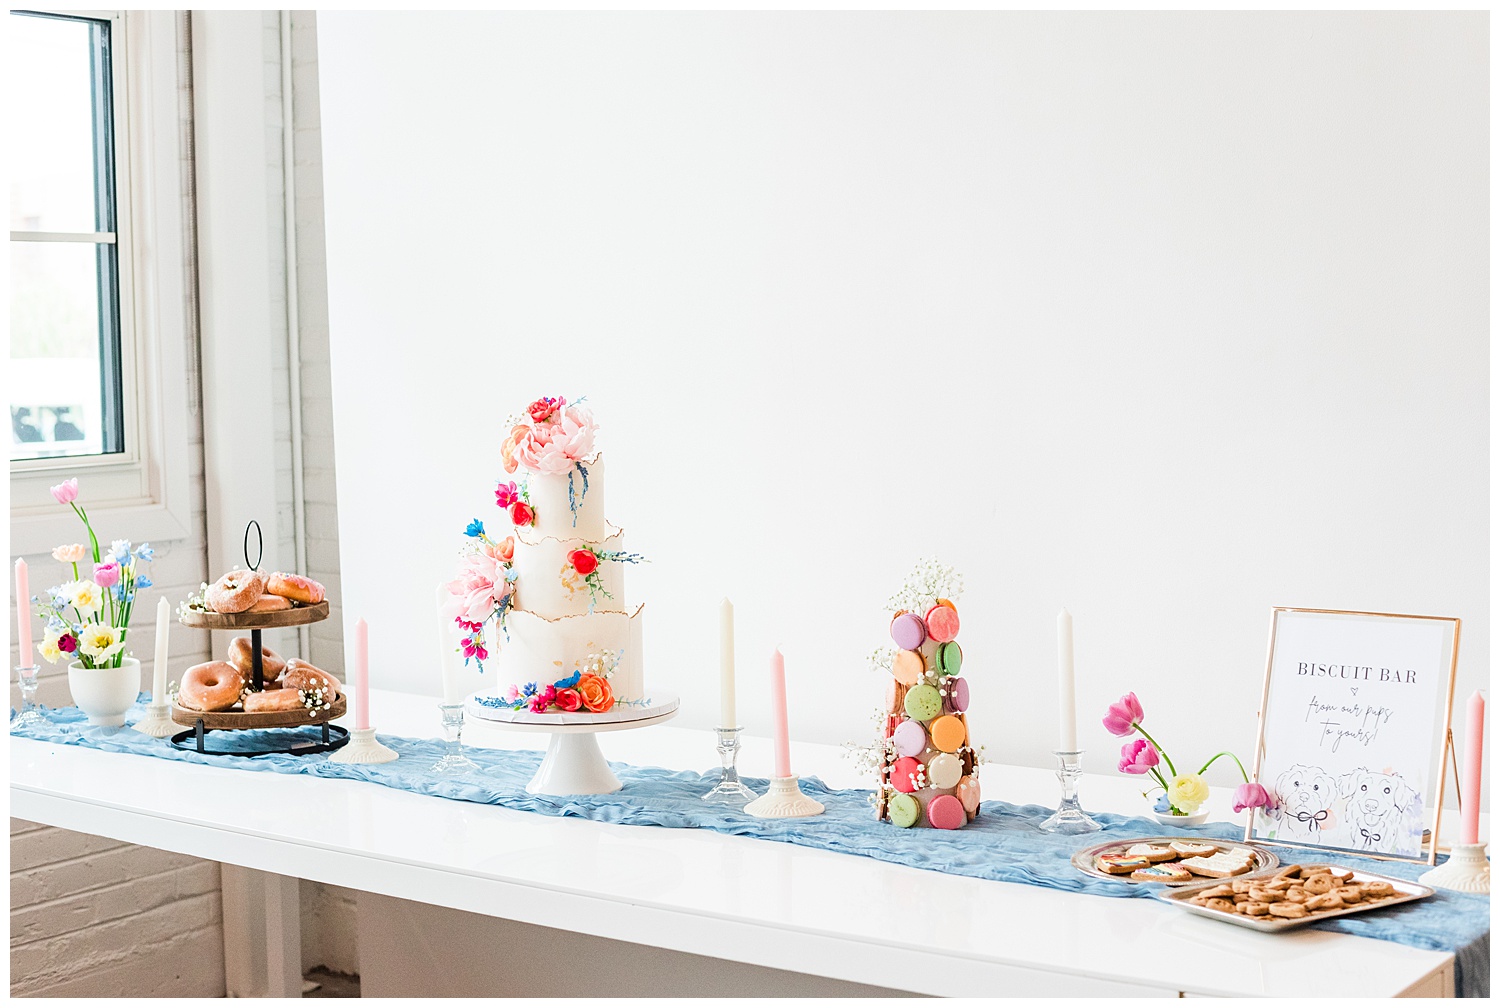 A white dessert table line with a dusty blus cheese cloth and various colorful desserts including a donut tower, a white cake with colorful flowers, a macaroon tower, dog treats, and white candles spread out on the table for decoration